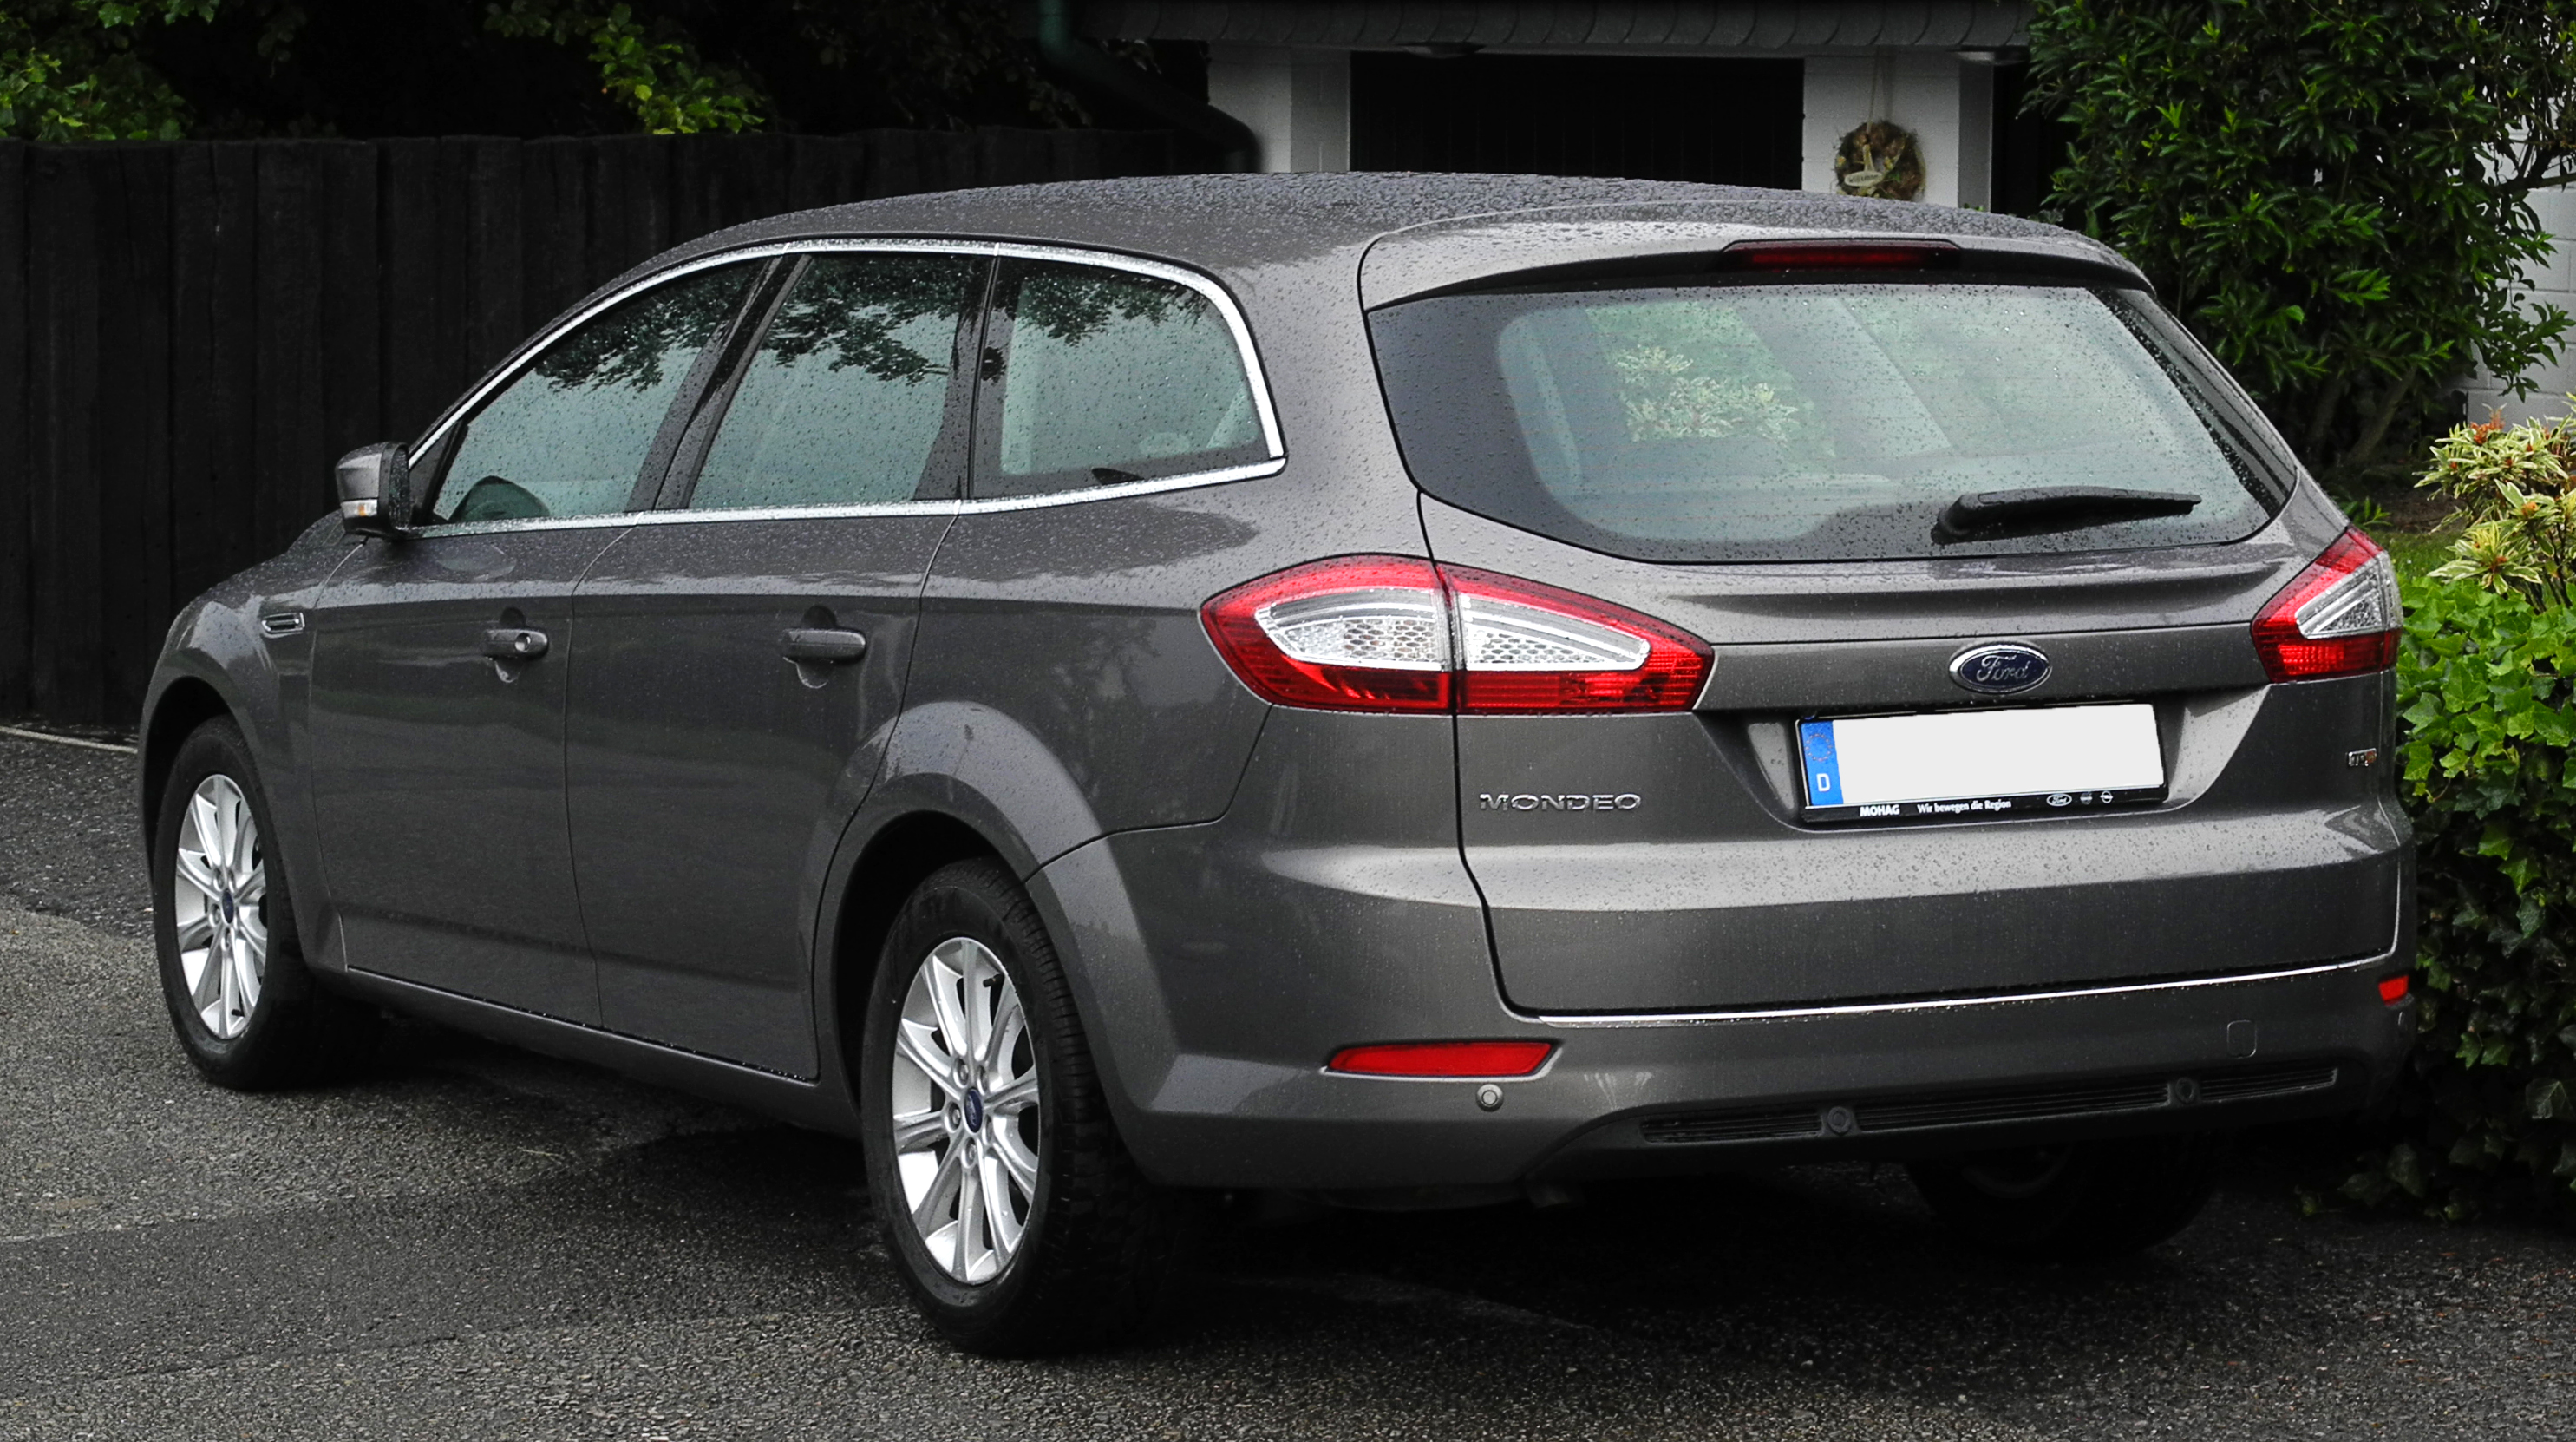 Ford Mondeo Turnier 2.0 TDCi technical details, history